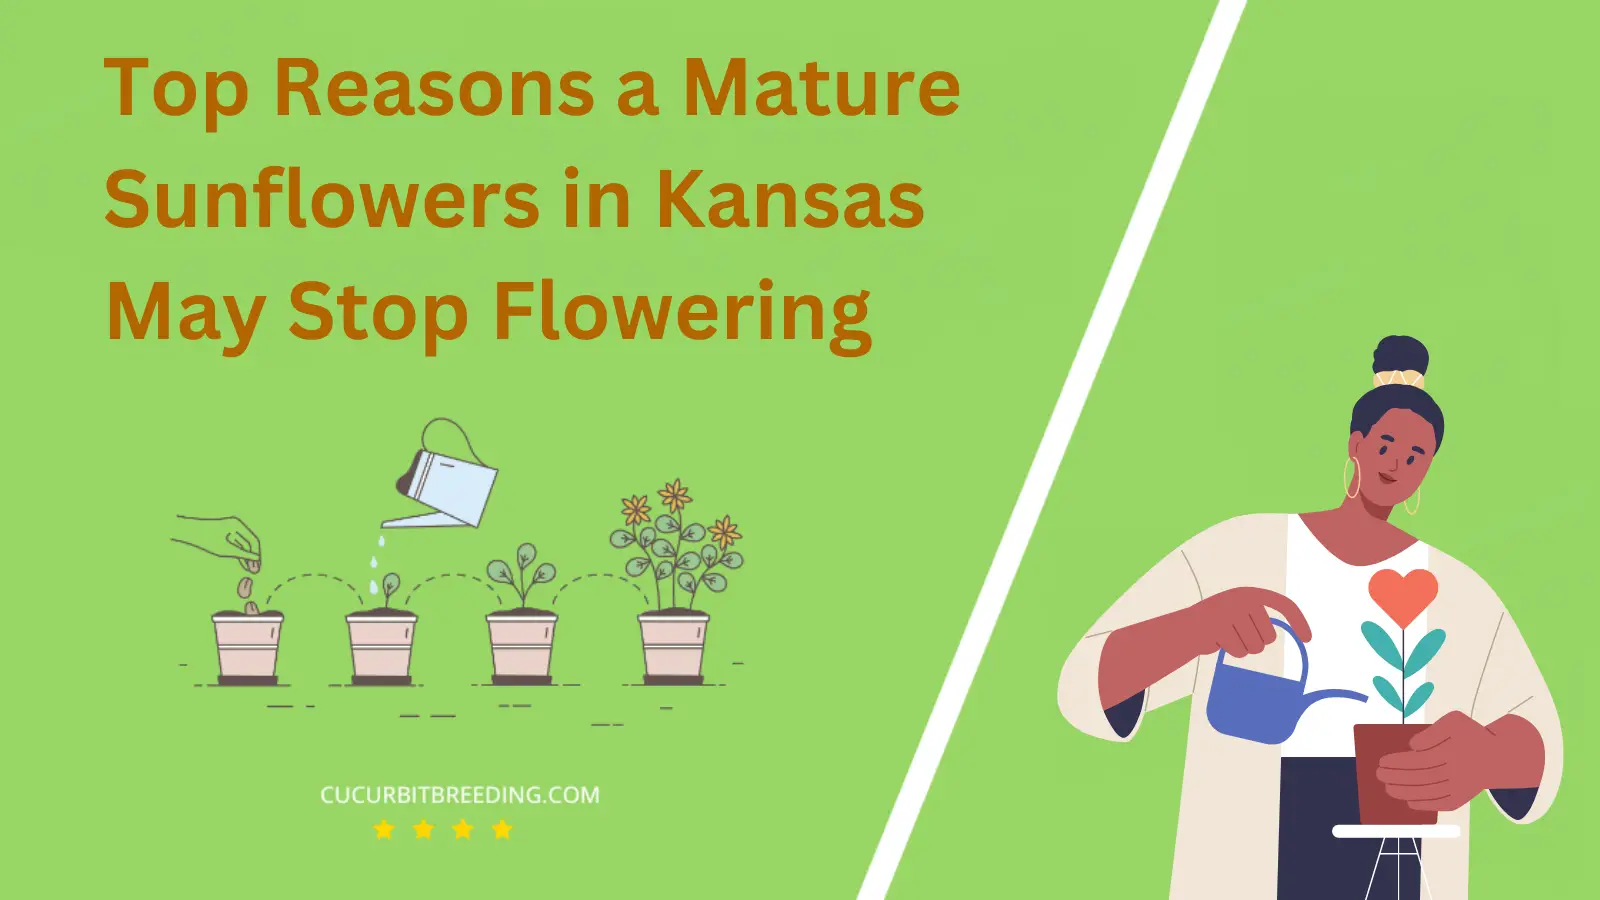 Top Reasons a Mature Sunflowers in Kansas May Stop Flowering